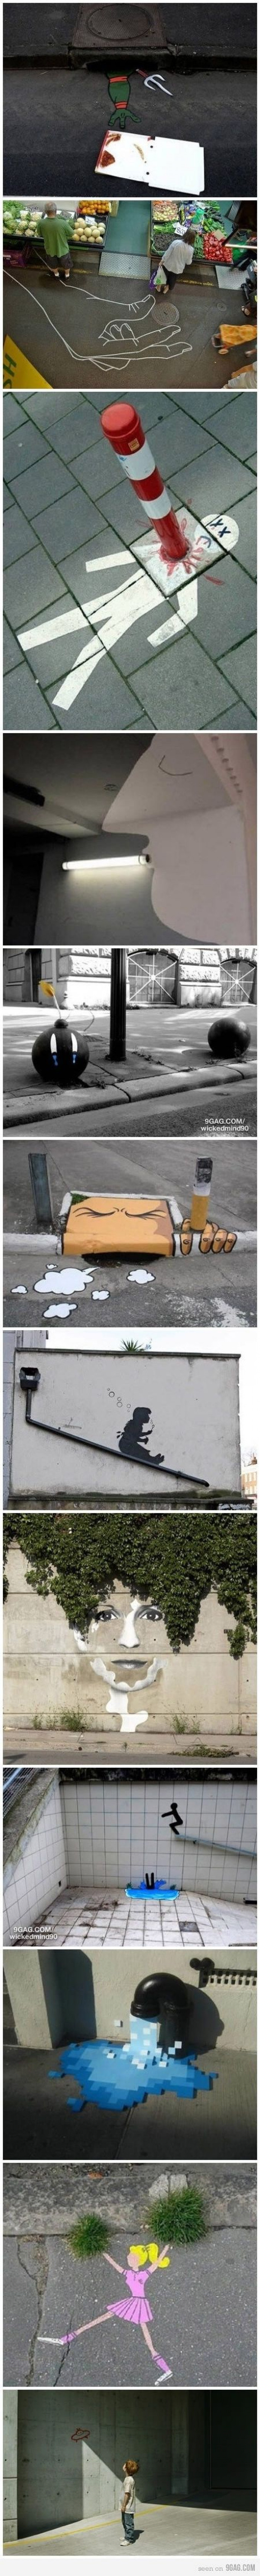 17 Creative Street Art That Will Make You Chuckle